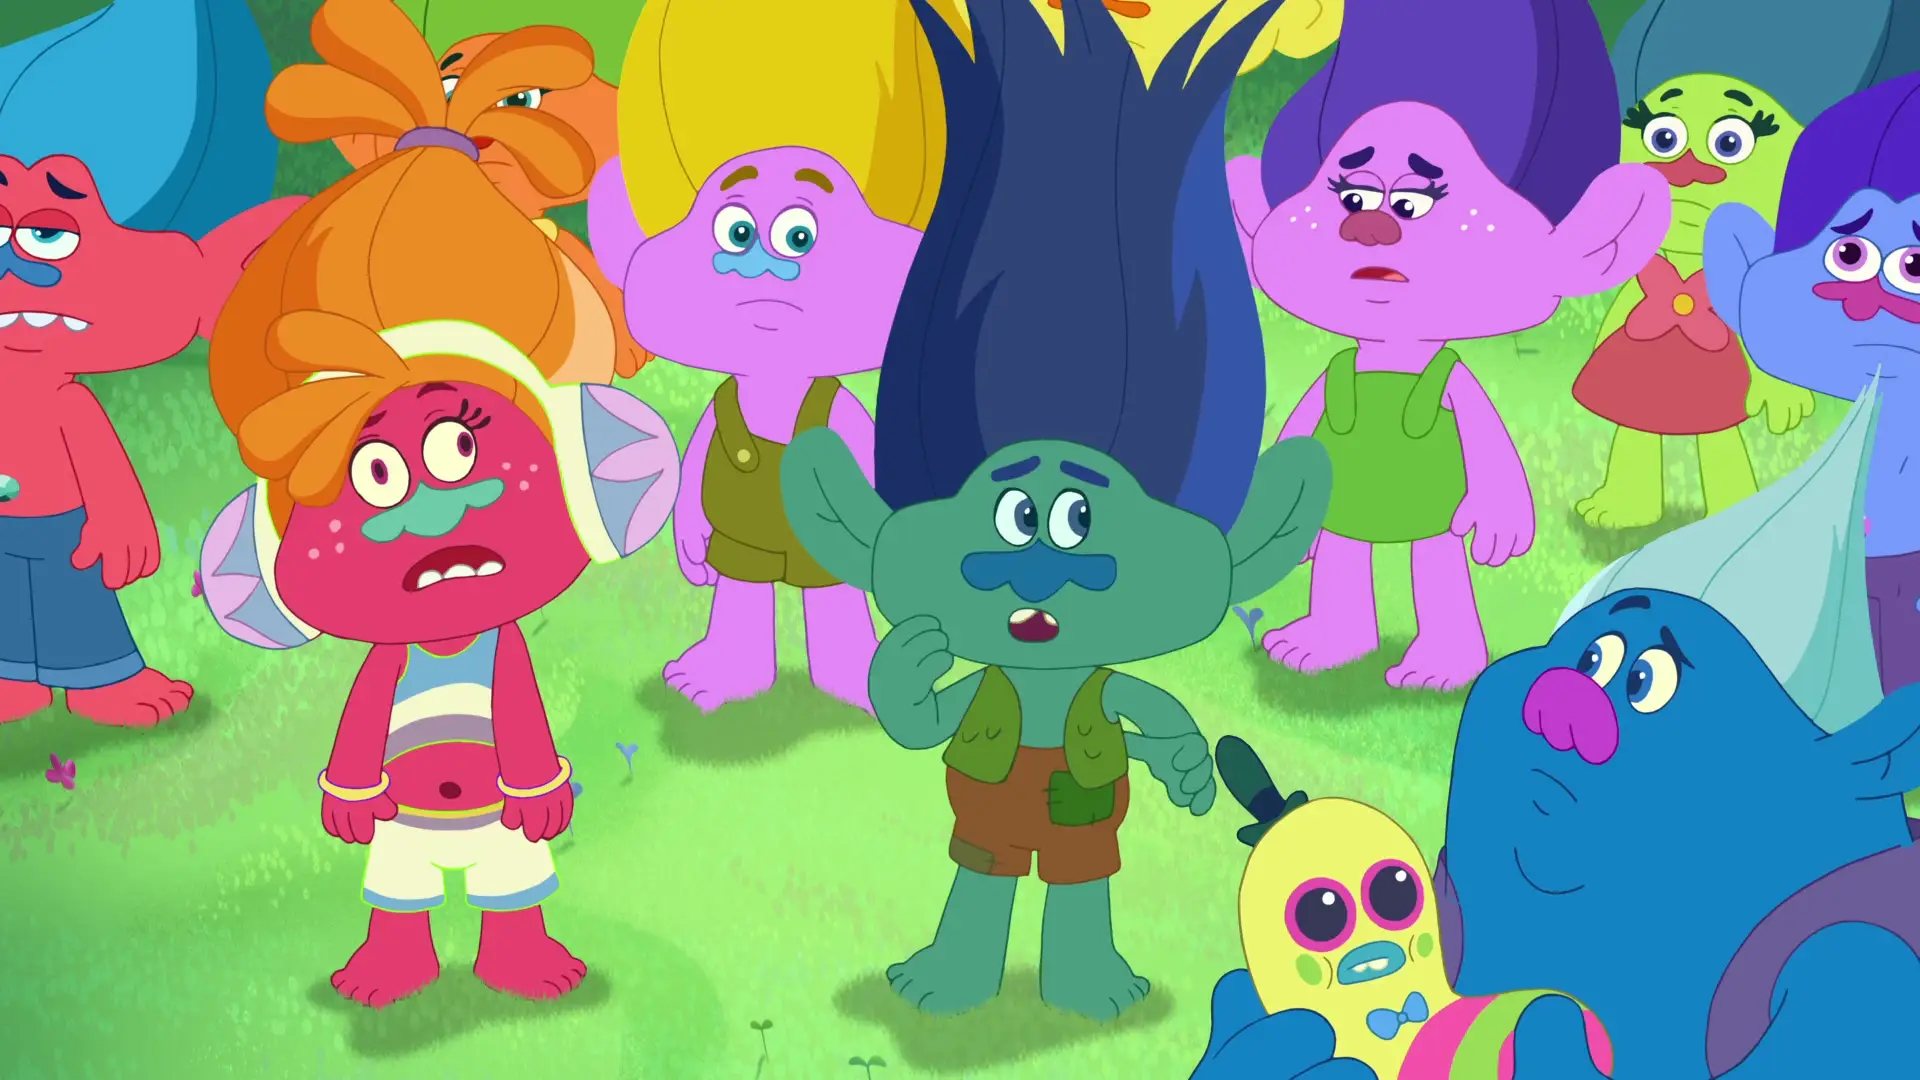 8. "Trolls: The Beat Goes On!" - wide 4